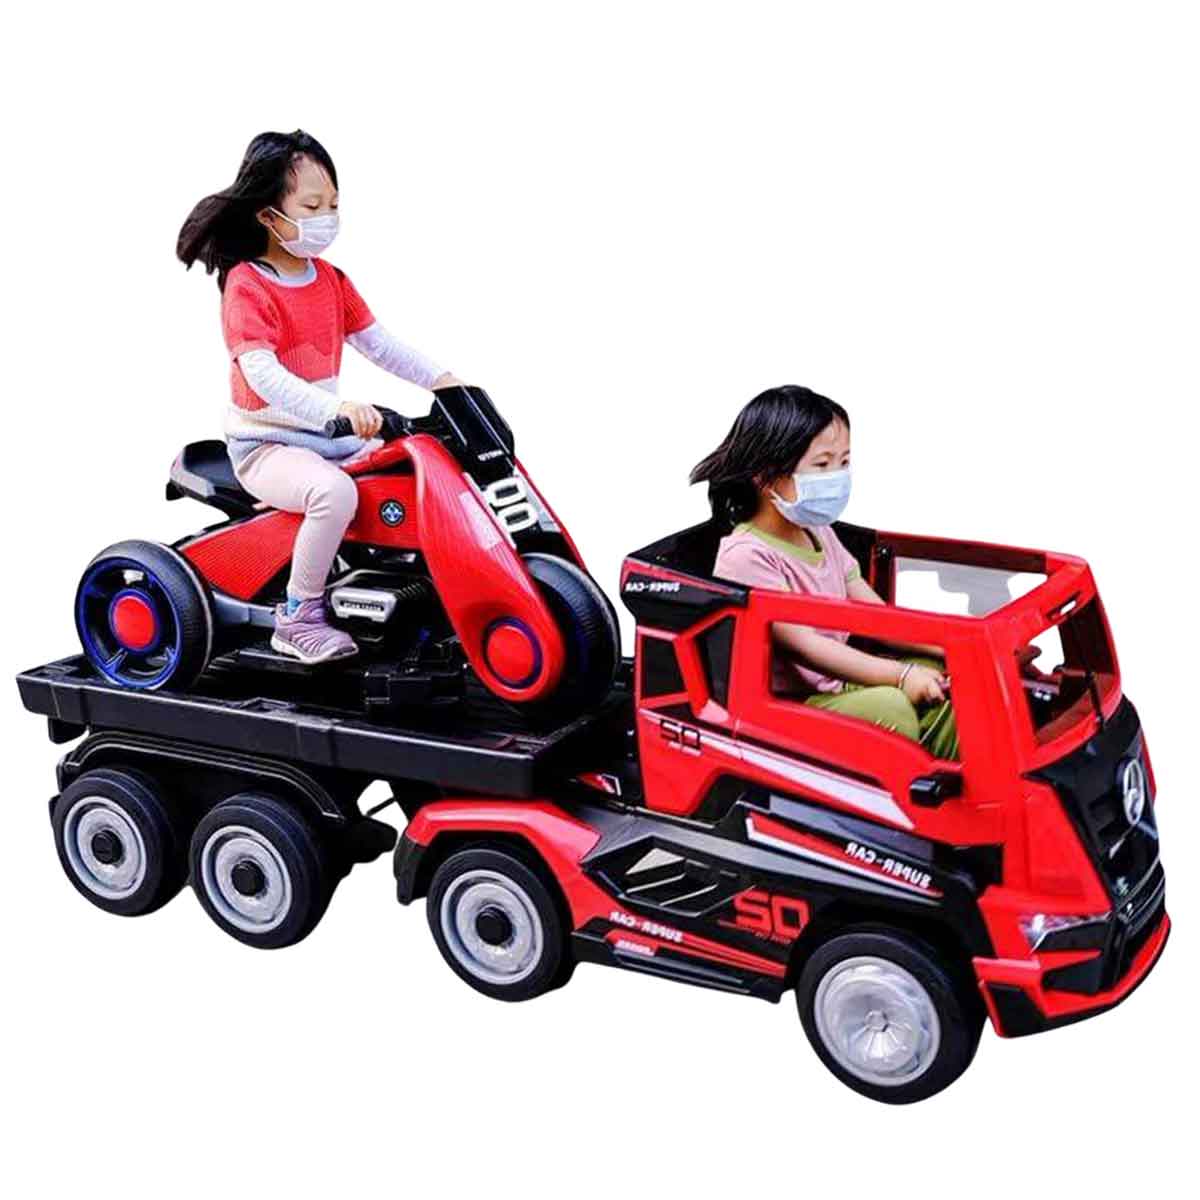 Megastar Kids Electric Ride-on Lorry With Trailer 12V